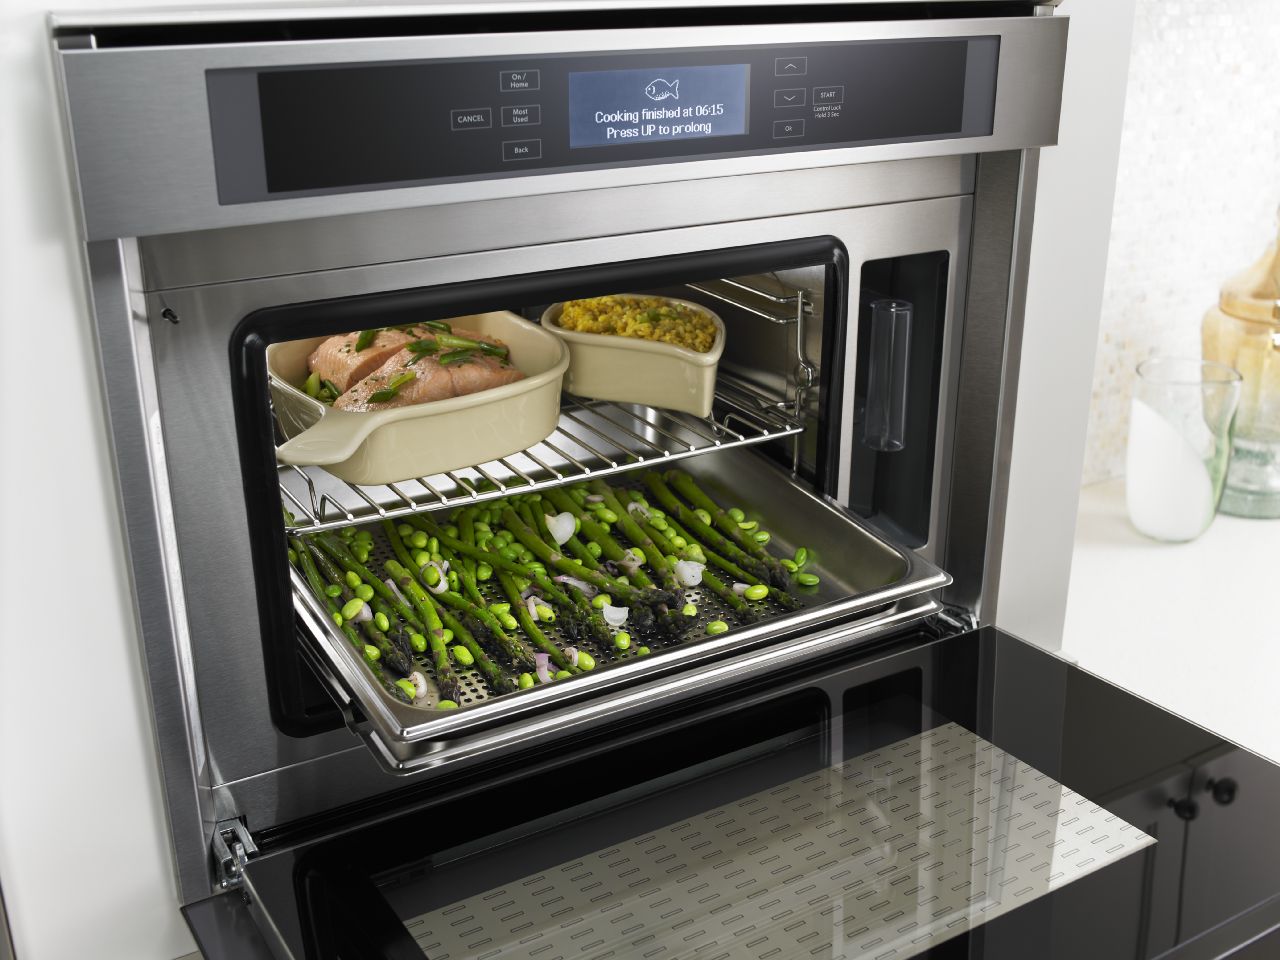  Steam ovens are a new favorite in today’s kitchens of cooking enthusiasts. It might be the most versatile appliance you’ll ever have in your kitchen.